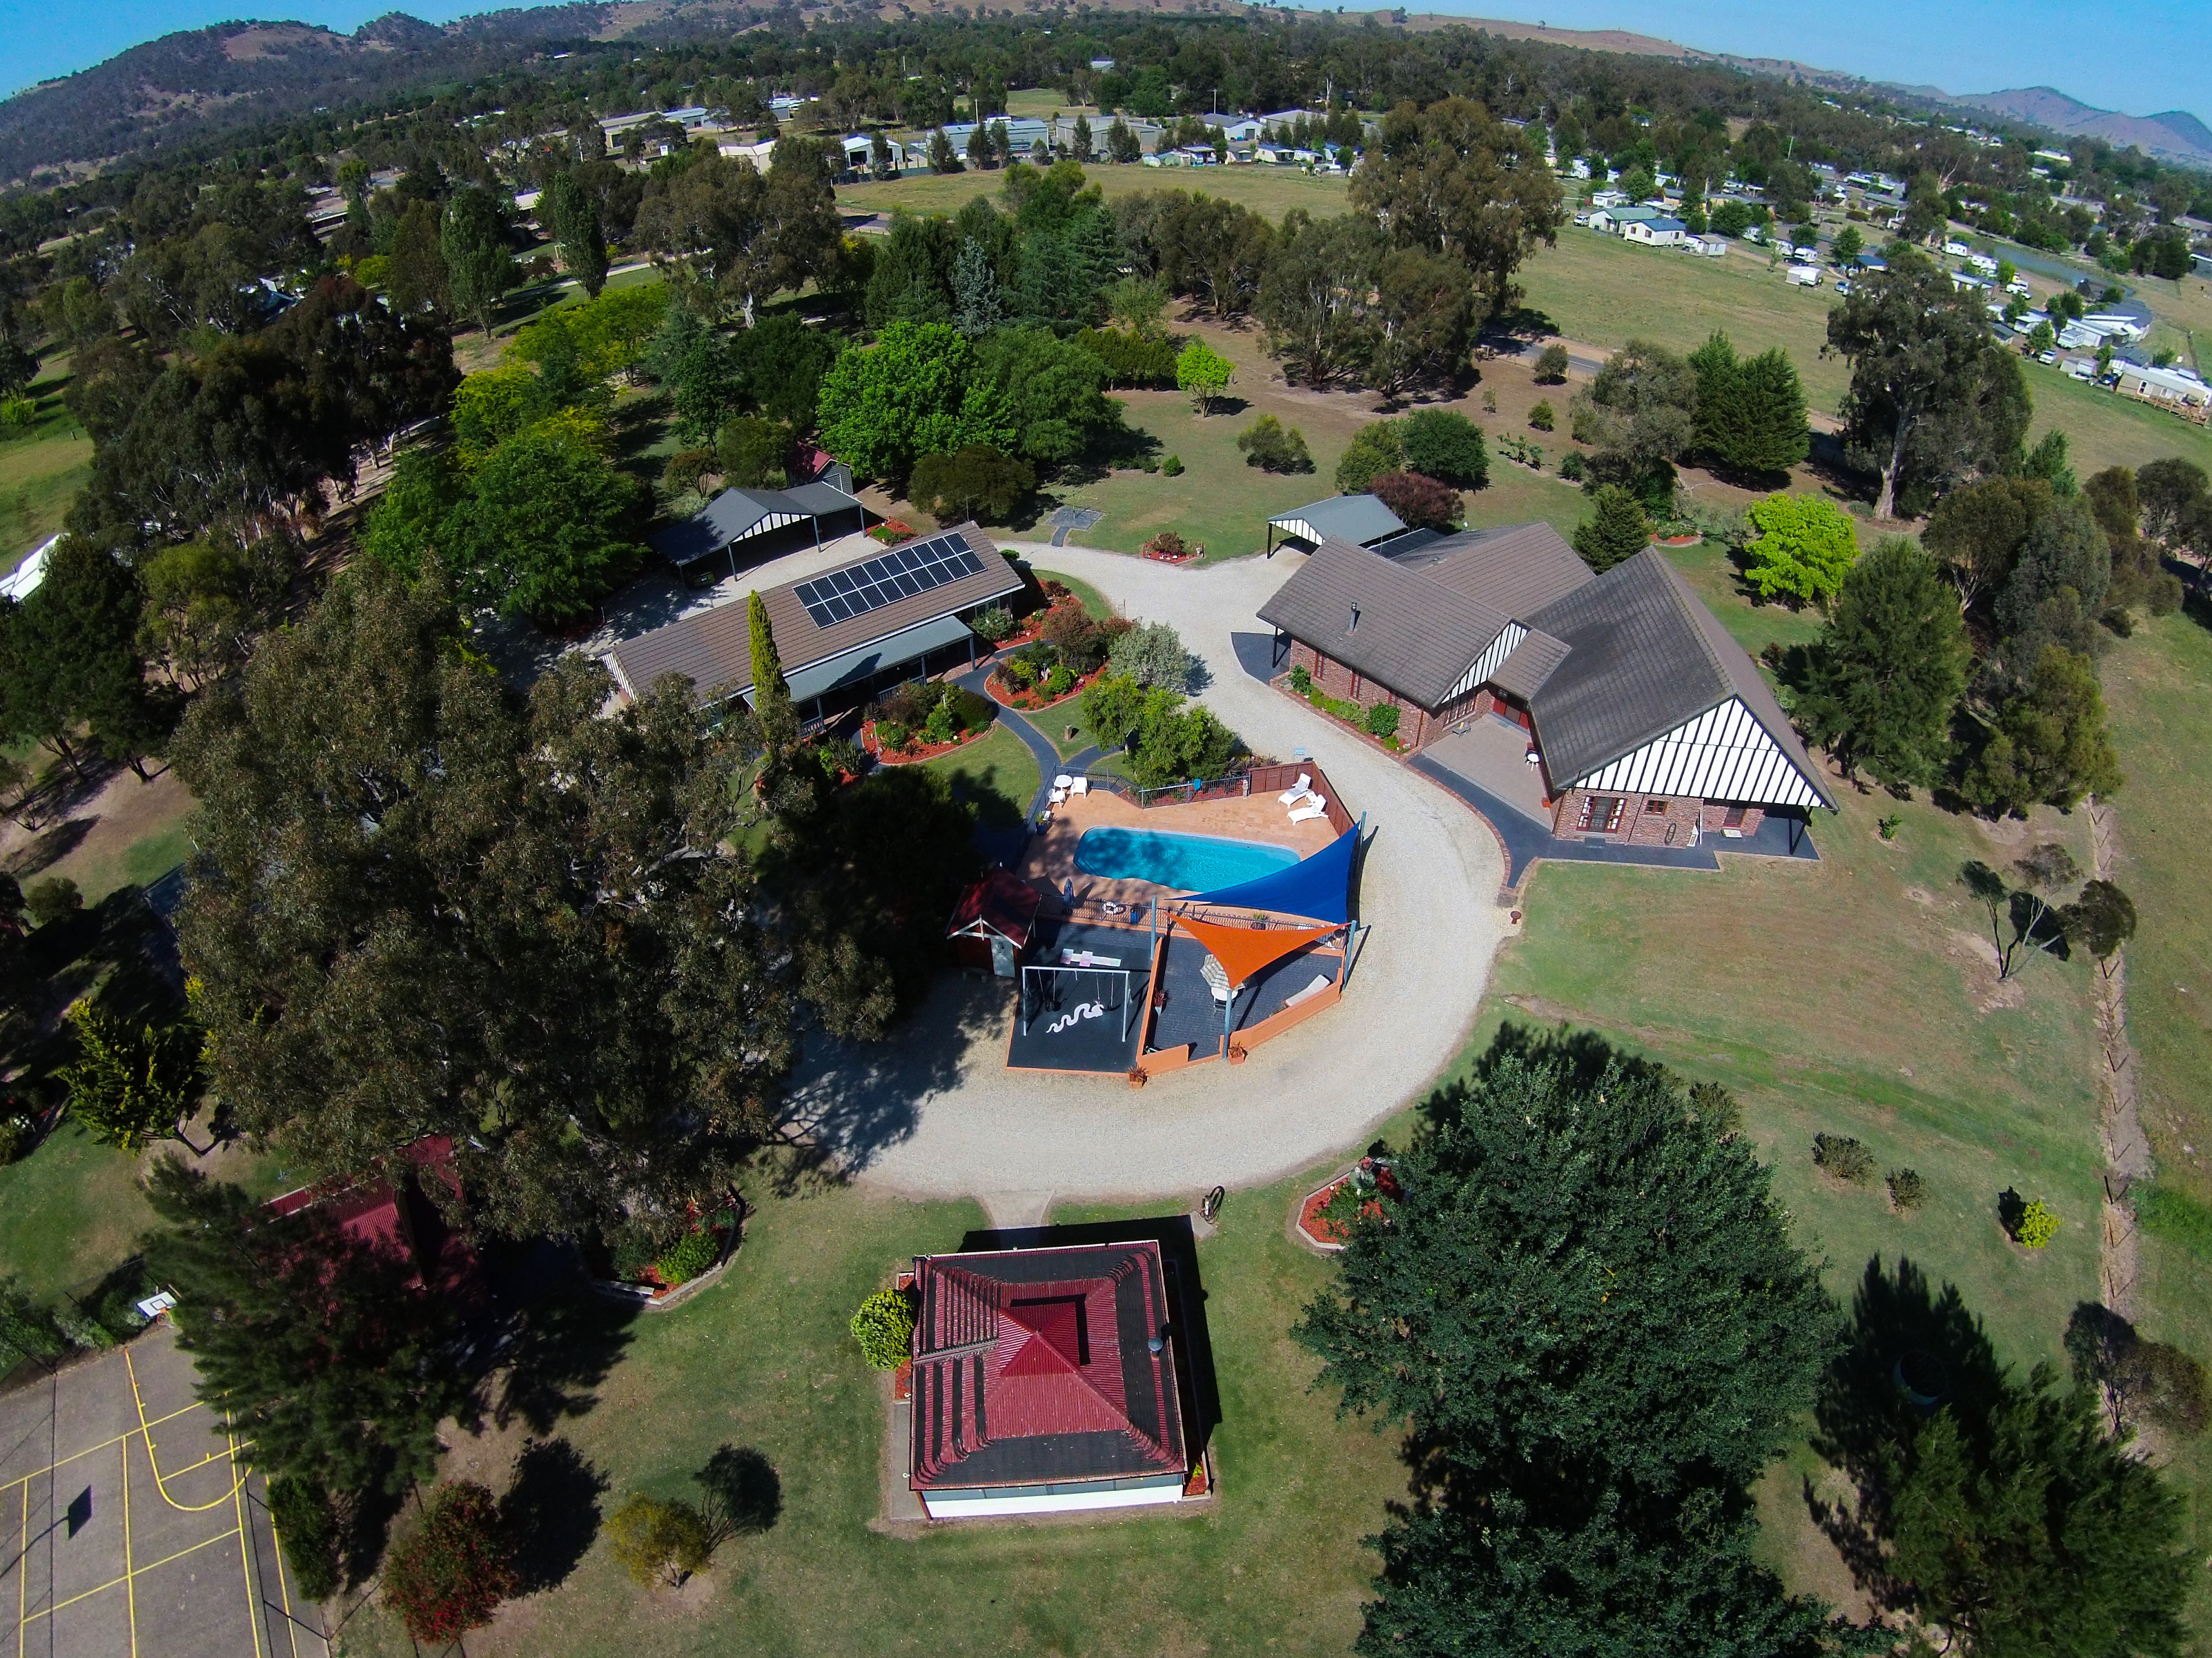 Greenvale Holiday Units - Accommodation Guide